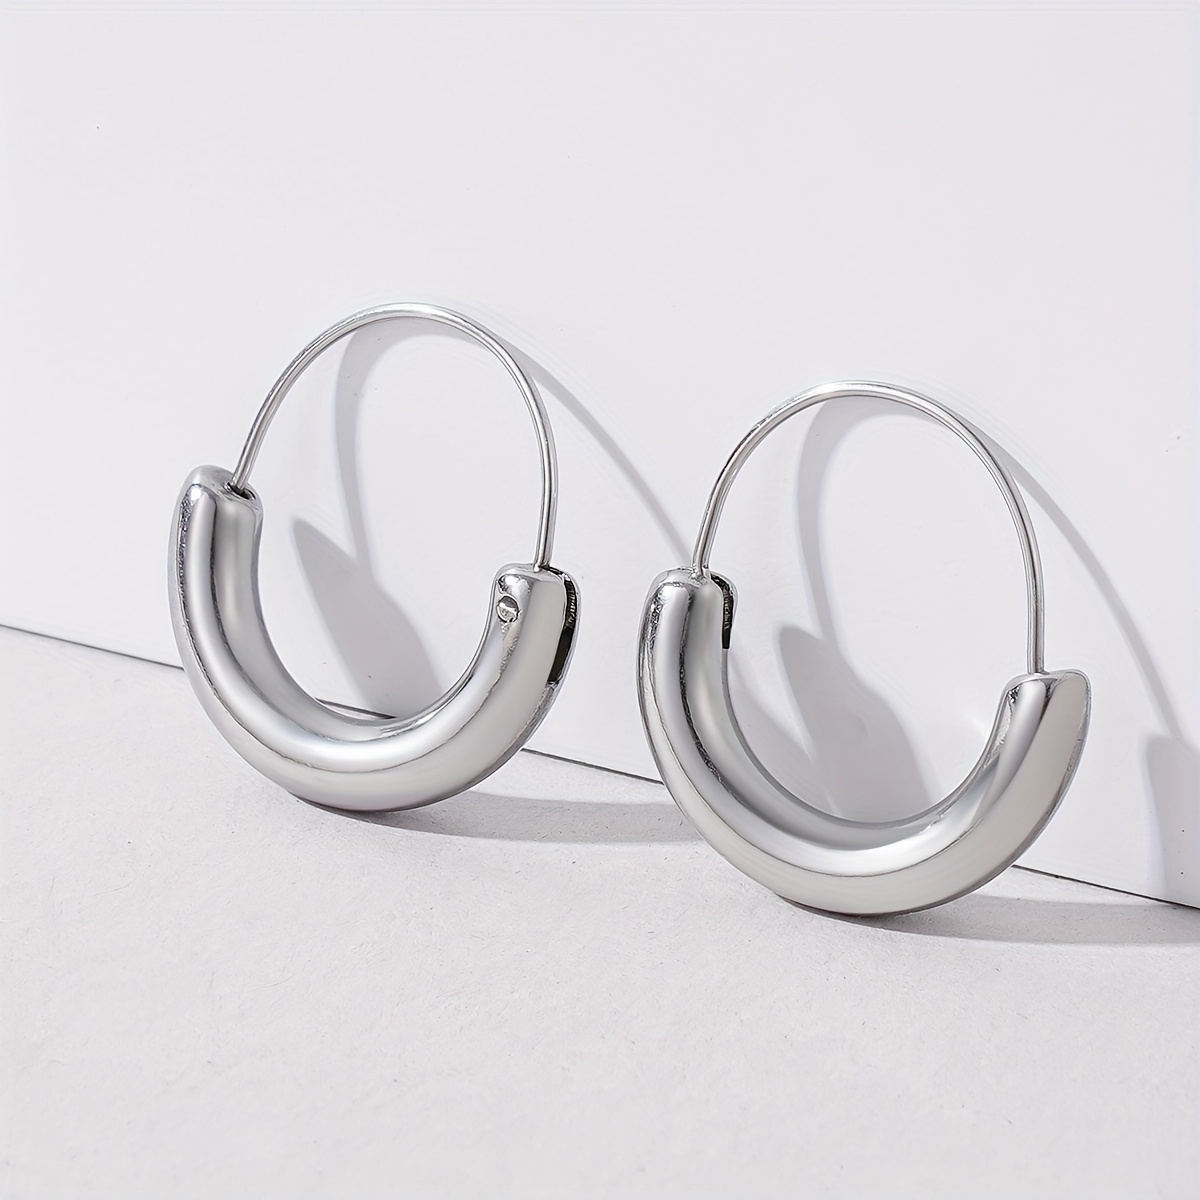 

Simple Silvery Circle Design Hoop Earrings Stainless Steel Jewelry Elegant Sexy Style Match Female Daily Outfits